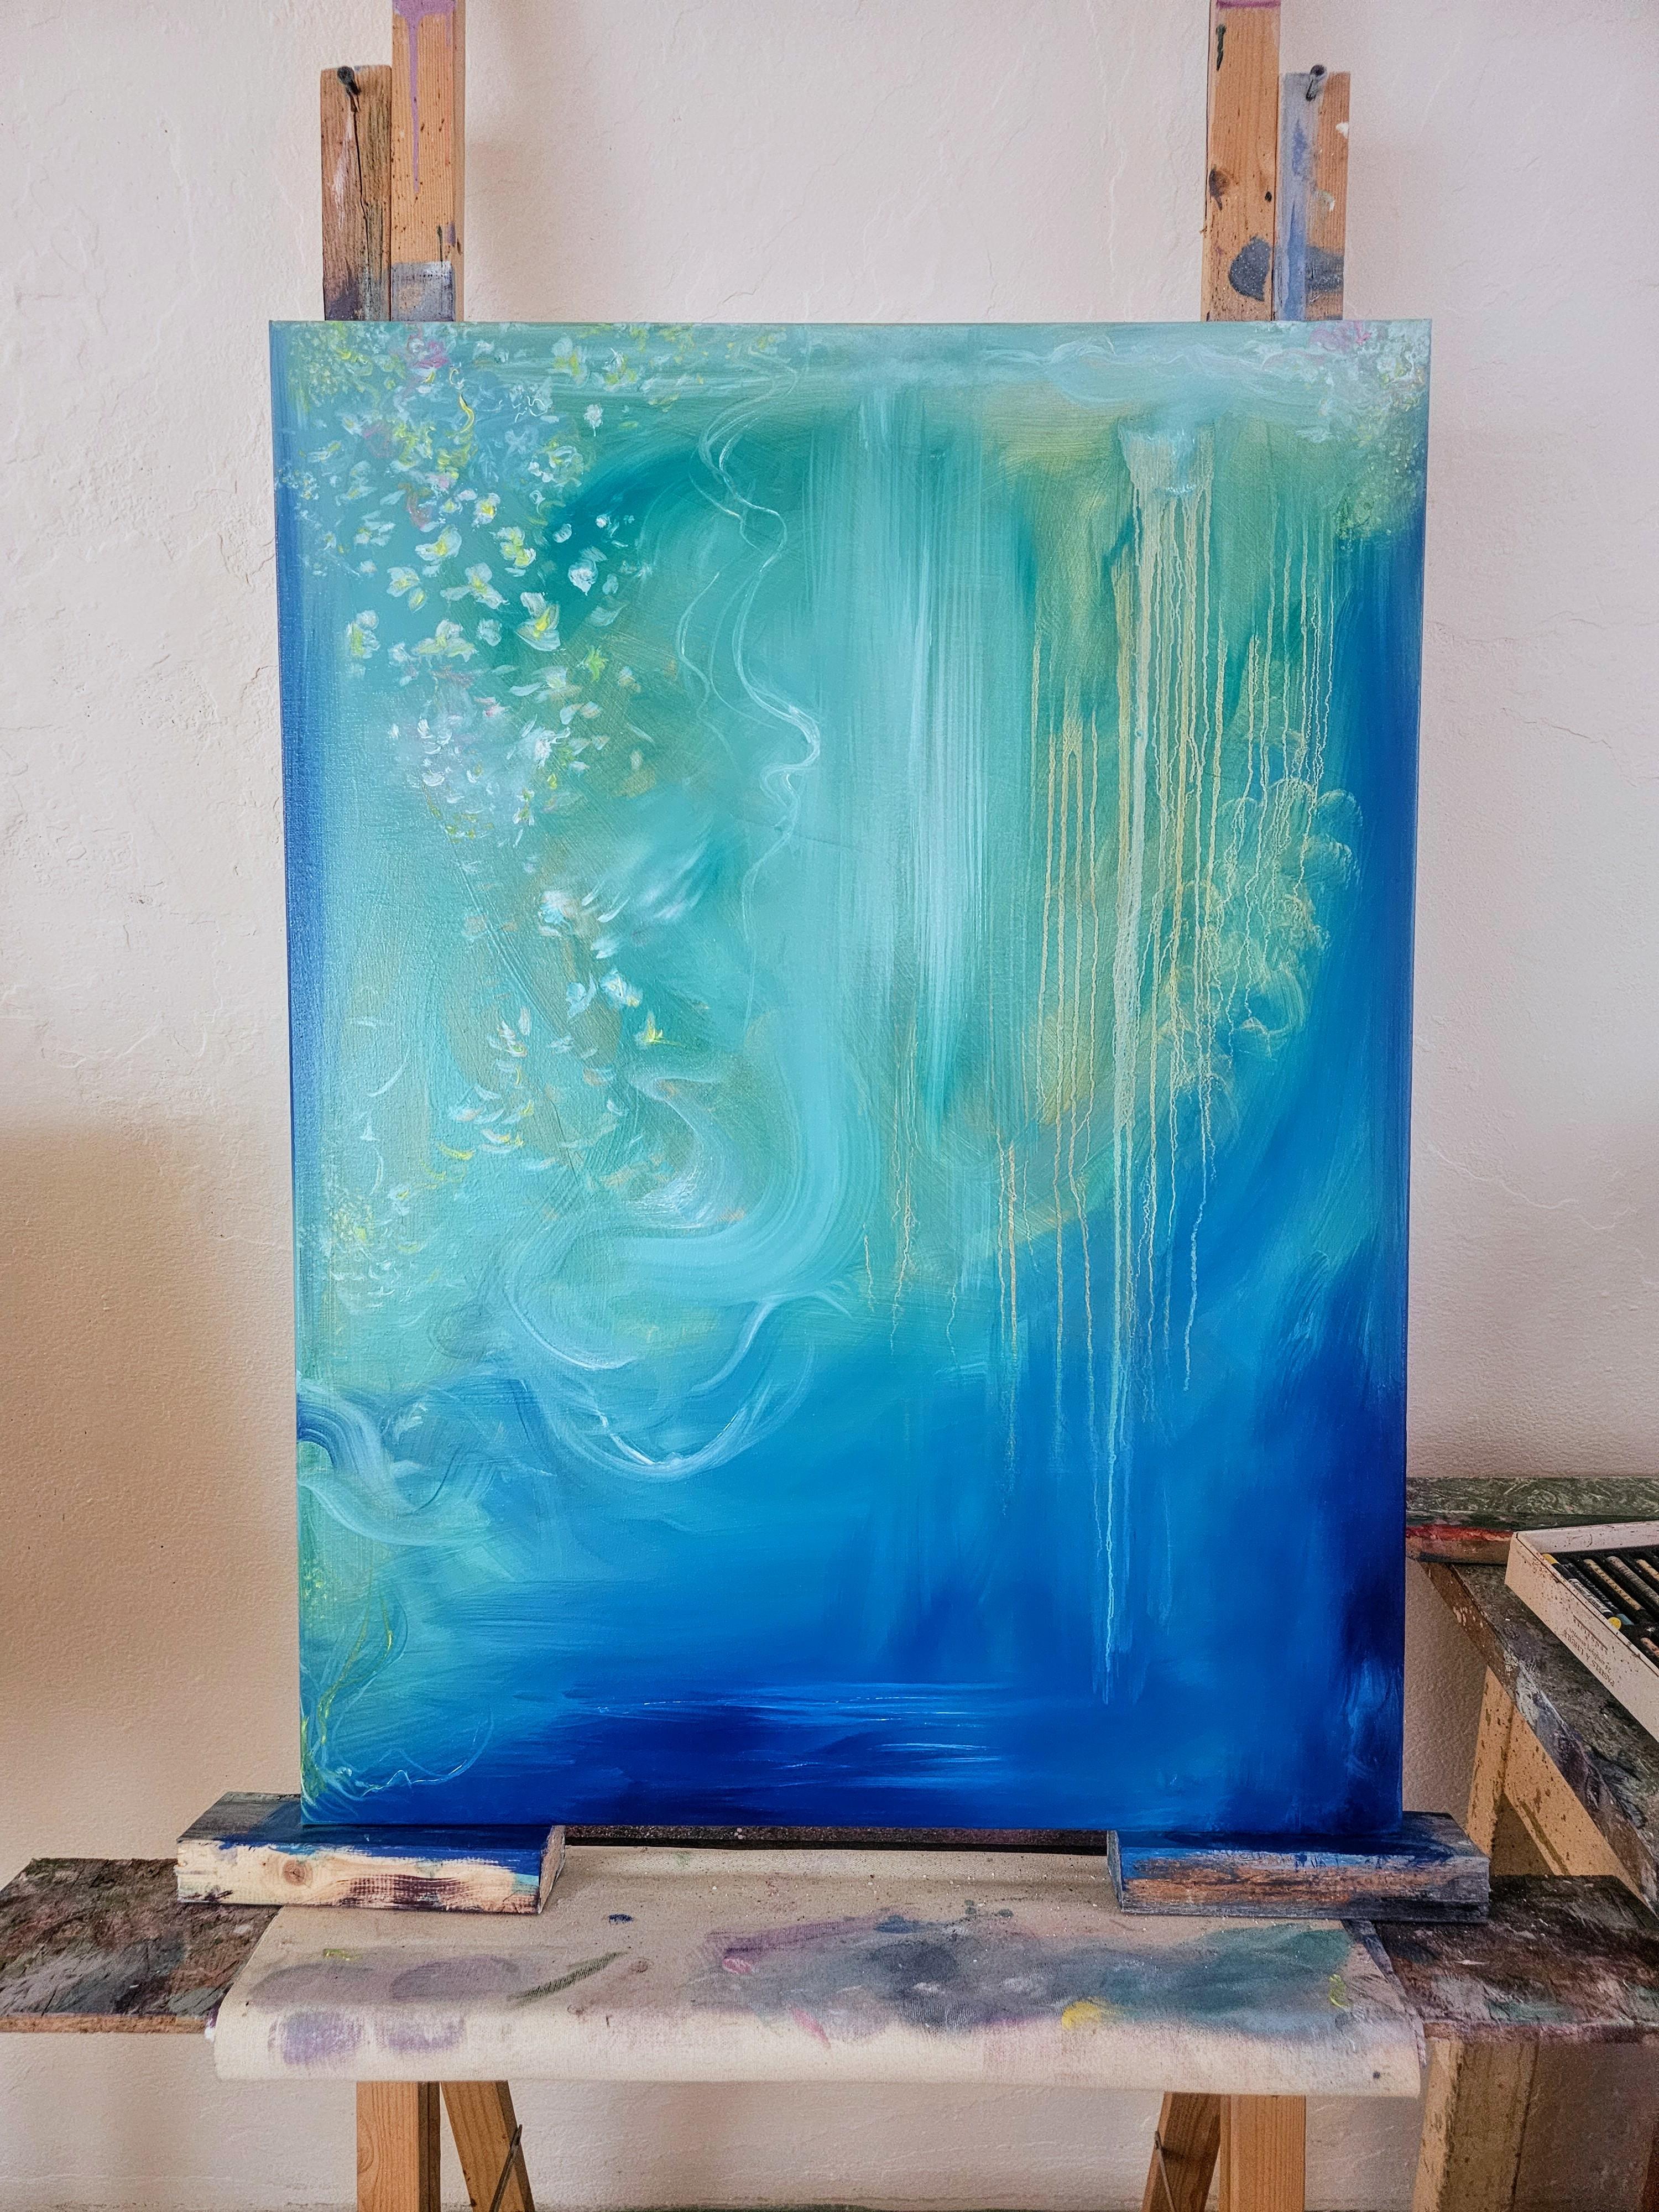 Jasmine of the sea - blue green abstract flowy sea painting - Painting by Jennifer L. Baker